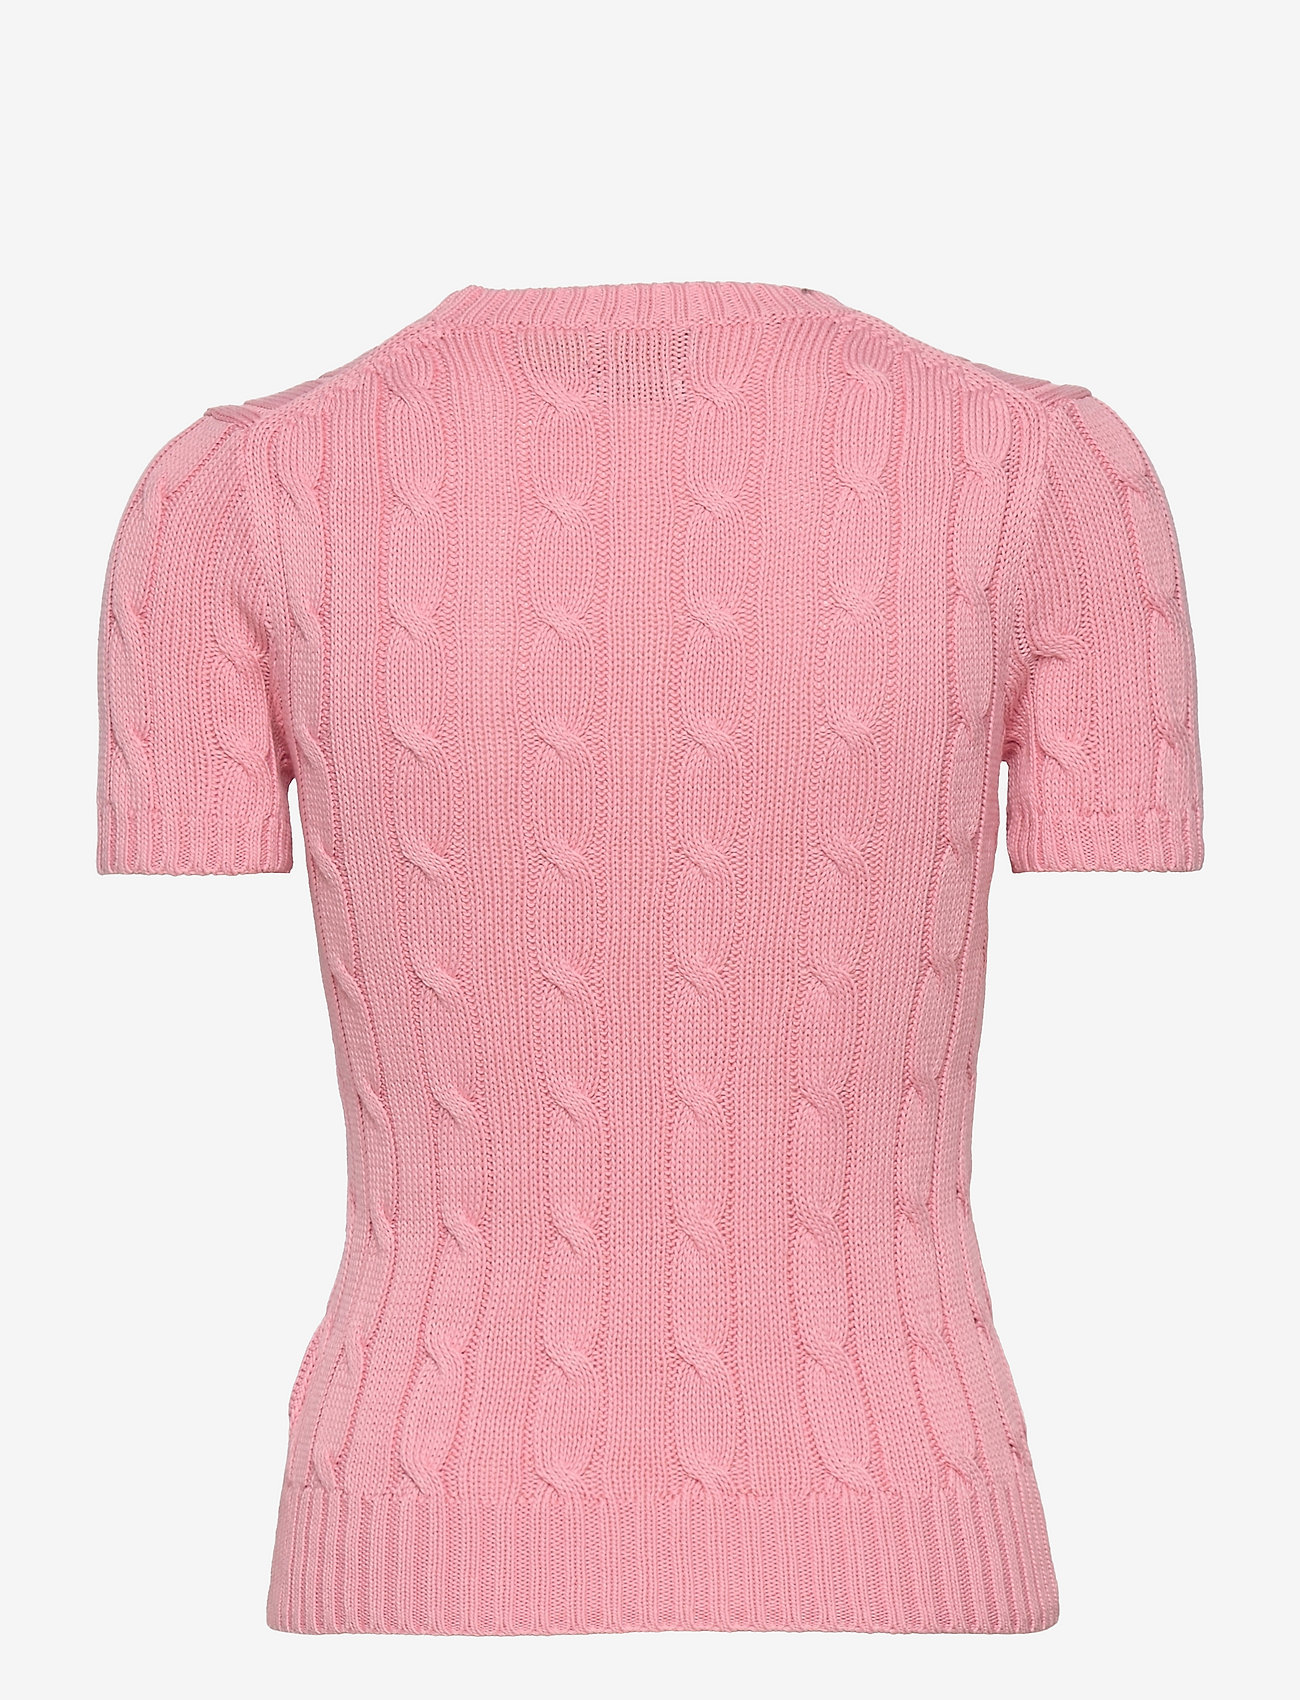 Polo Ralph Lauren - Cable-Knit Short-Sleeve Sweater - jumpers - carmel pink - 1